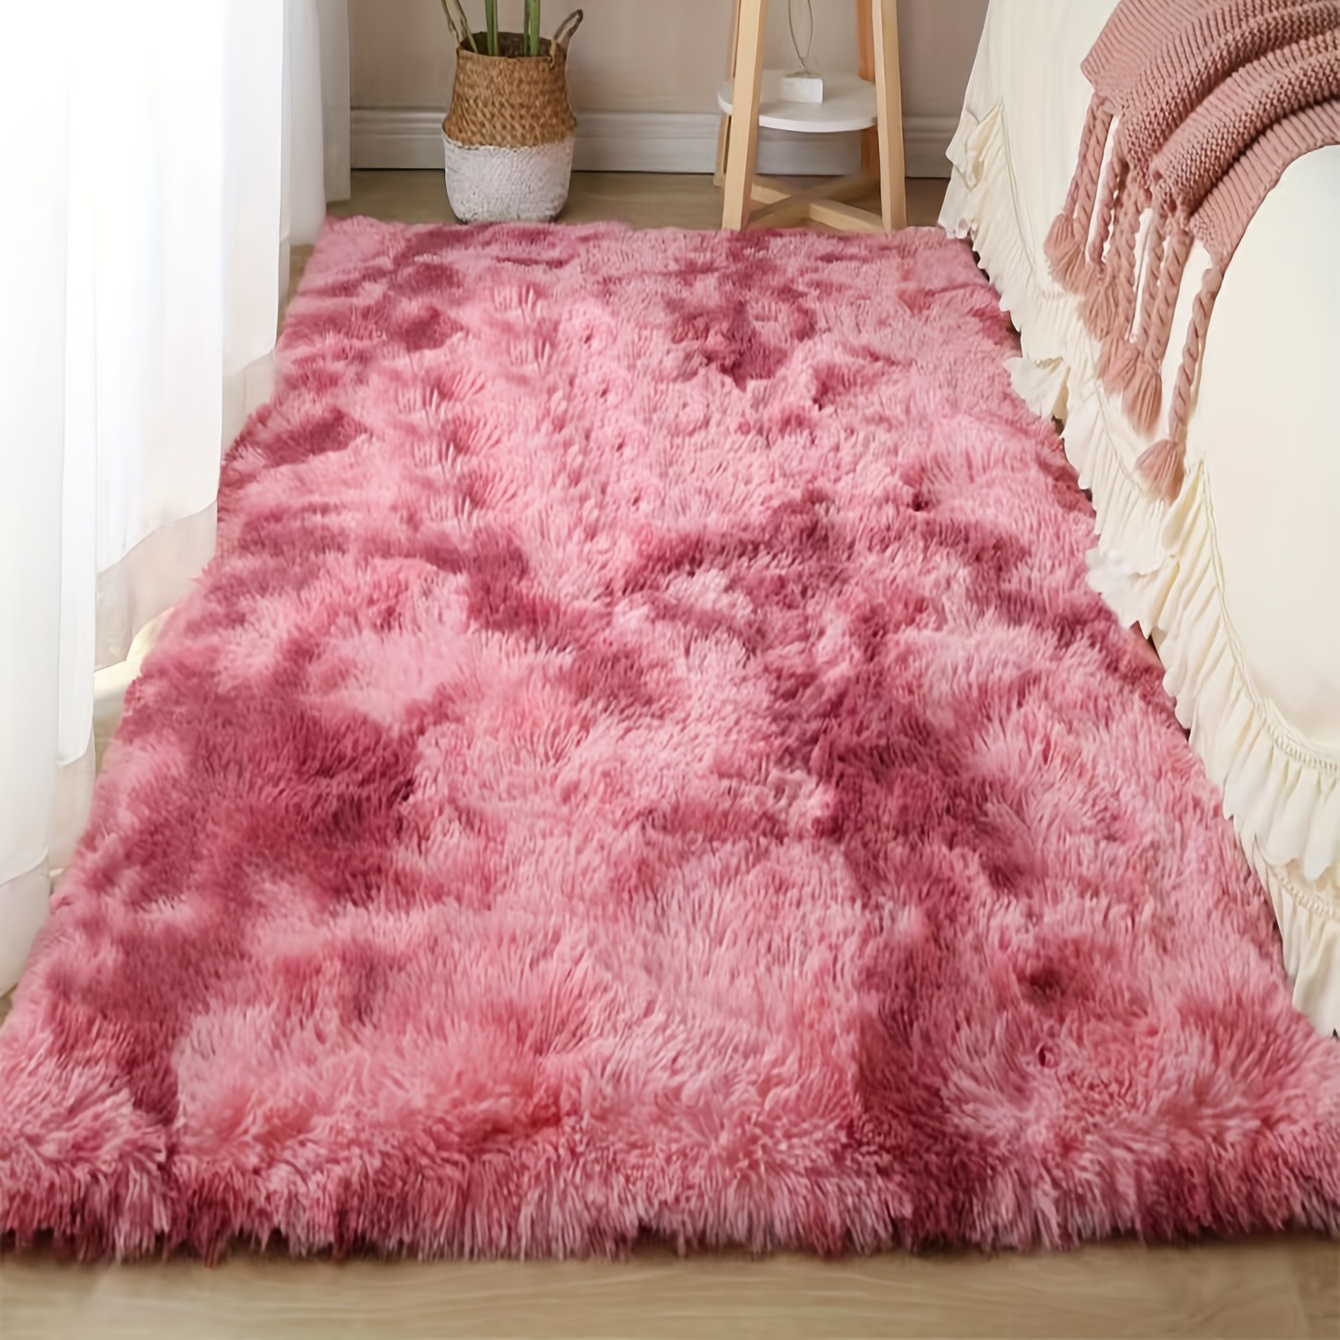 1pc ultra plush soft area rugs for bedroom living room luxury tied dyed fluffy bedside rug washable shag furry carpet non shedding for nursery children kids girls room home decorative rug home decor room decor 27 55 62 99in 70 160cm details 1